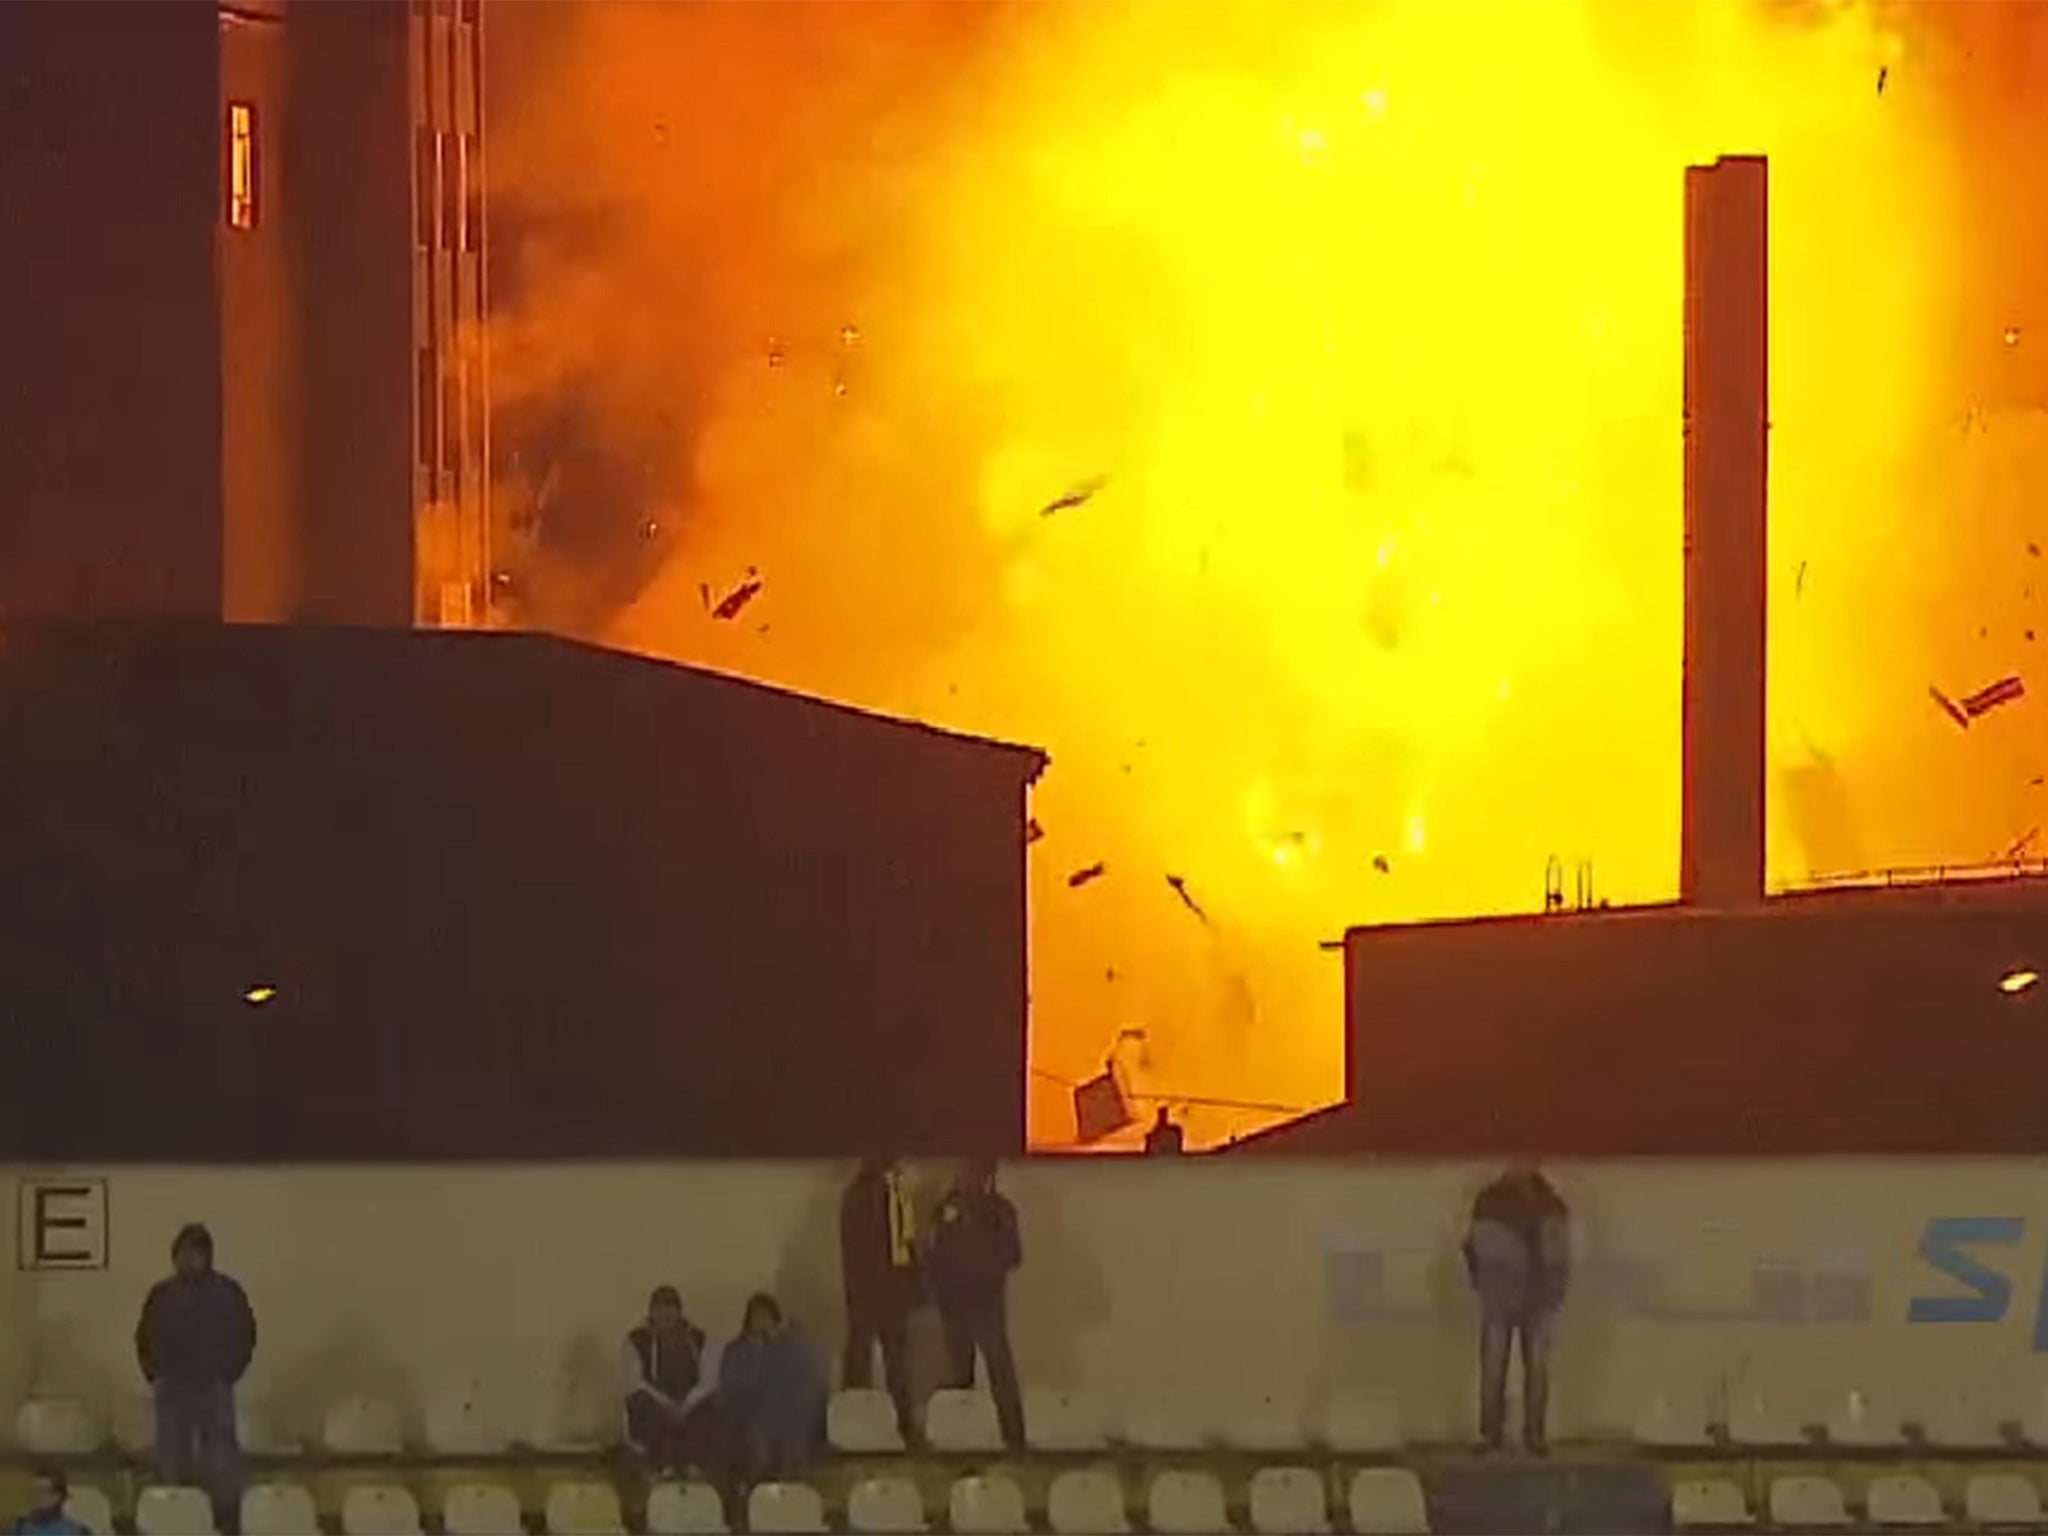 The explosion erupted during a game between FC Brasov and Ramnicu Valcea.